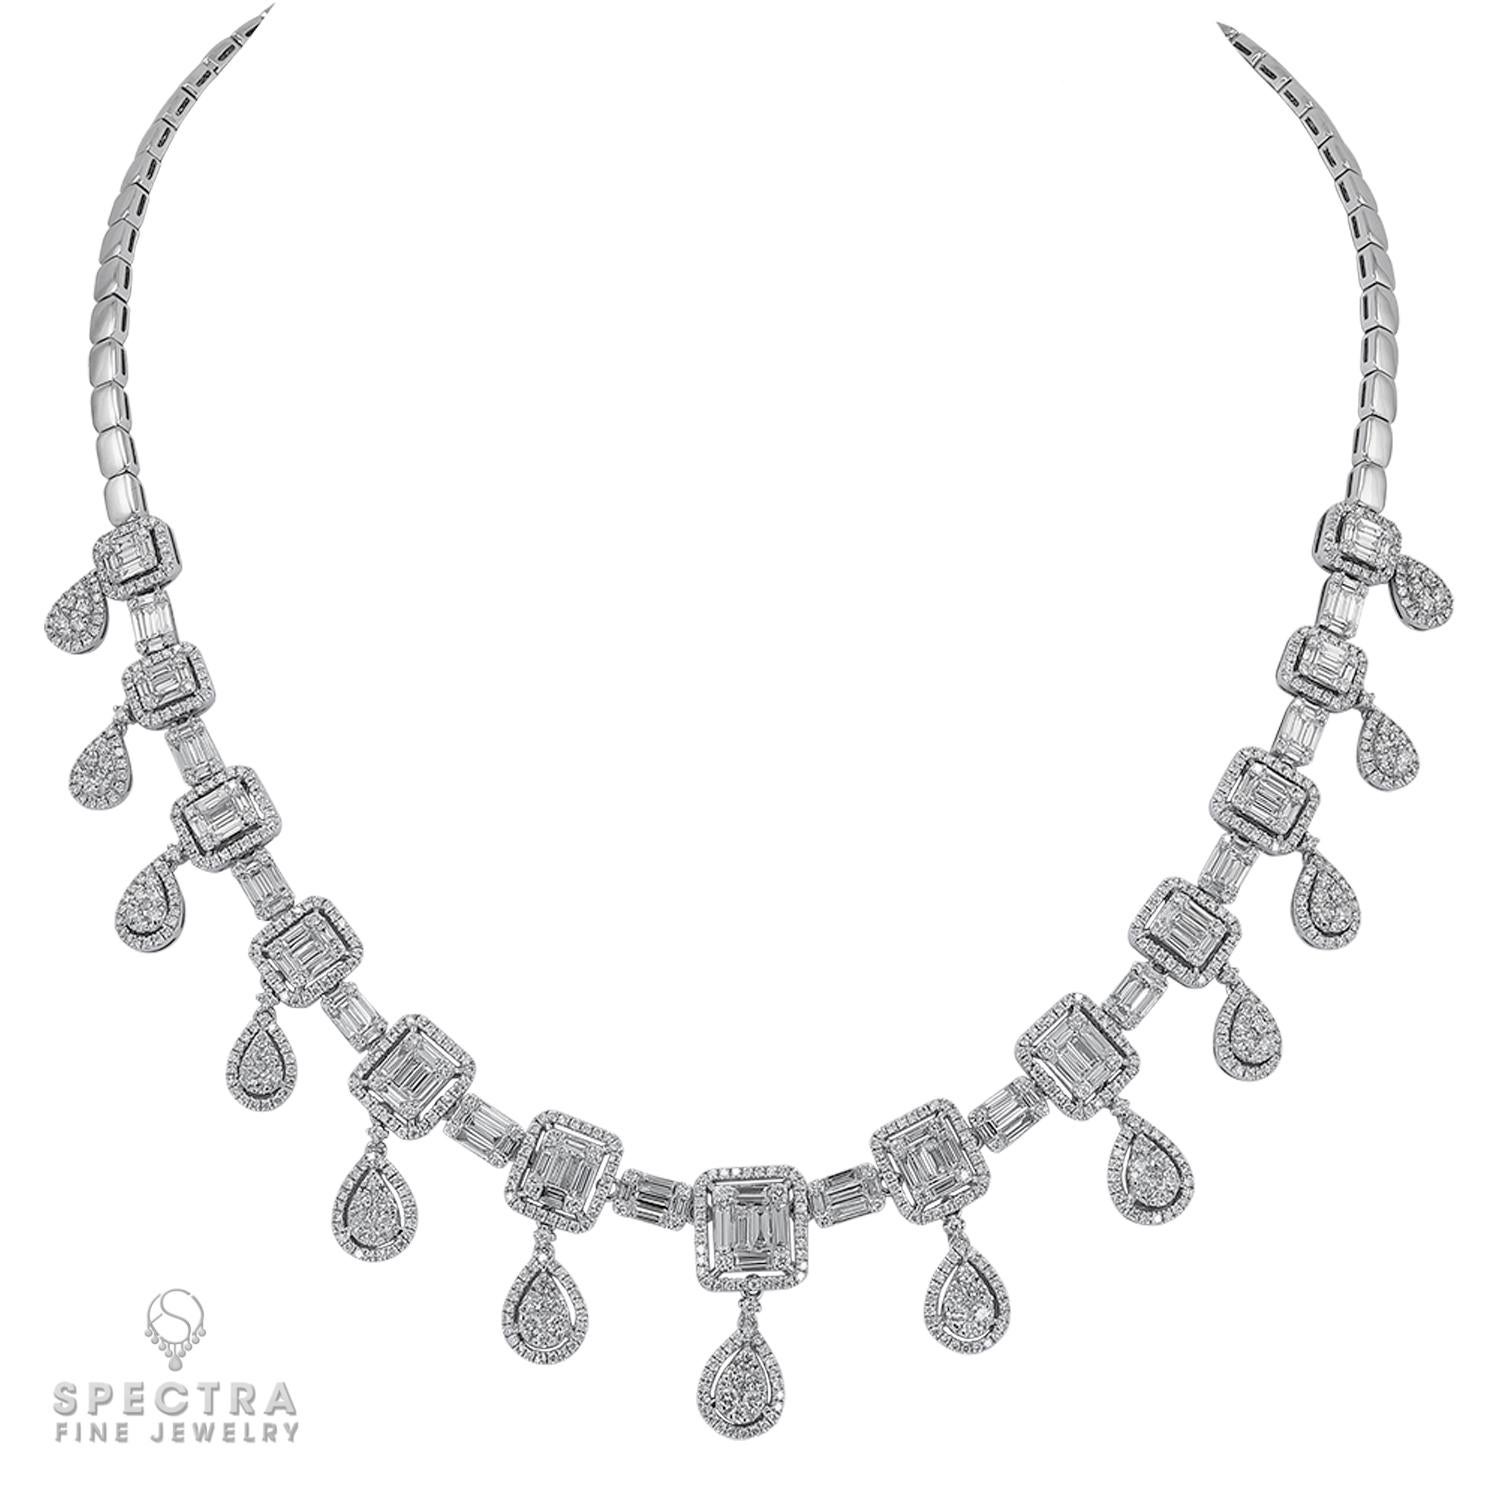 What could be more regal than diamonds, dangling pendants, and double halos, all elegantly arranged in one spectacular statement piece? This beautiful Diamond Bib Necklace from Spectra Fine Jewelry is crafted in 18K white gold set with 939 round and